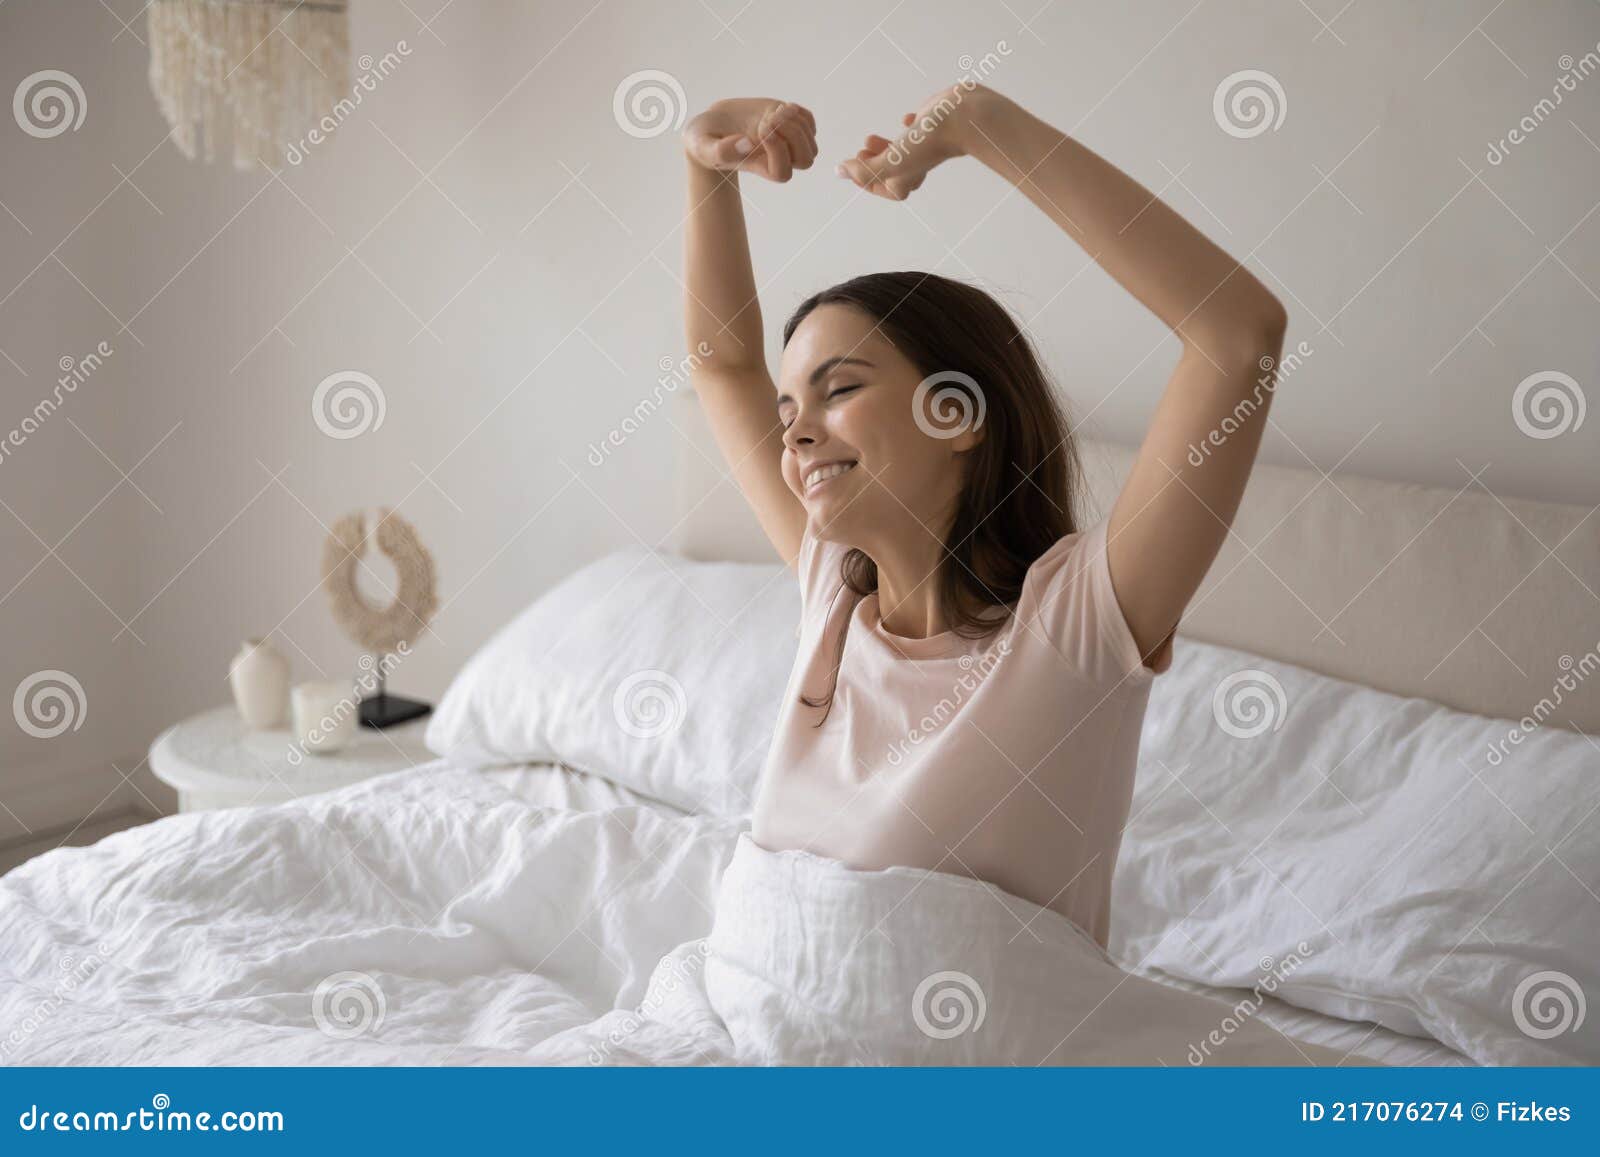 happy girl waking up early in morning